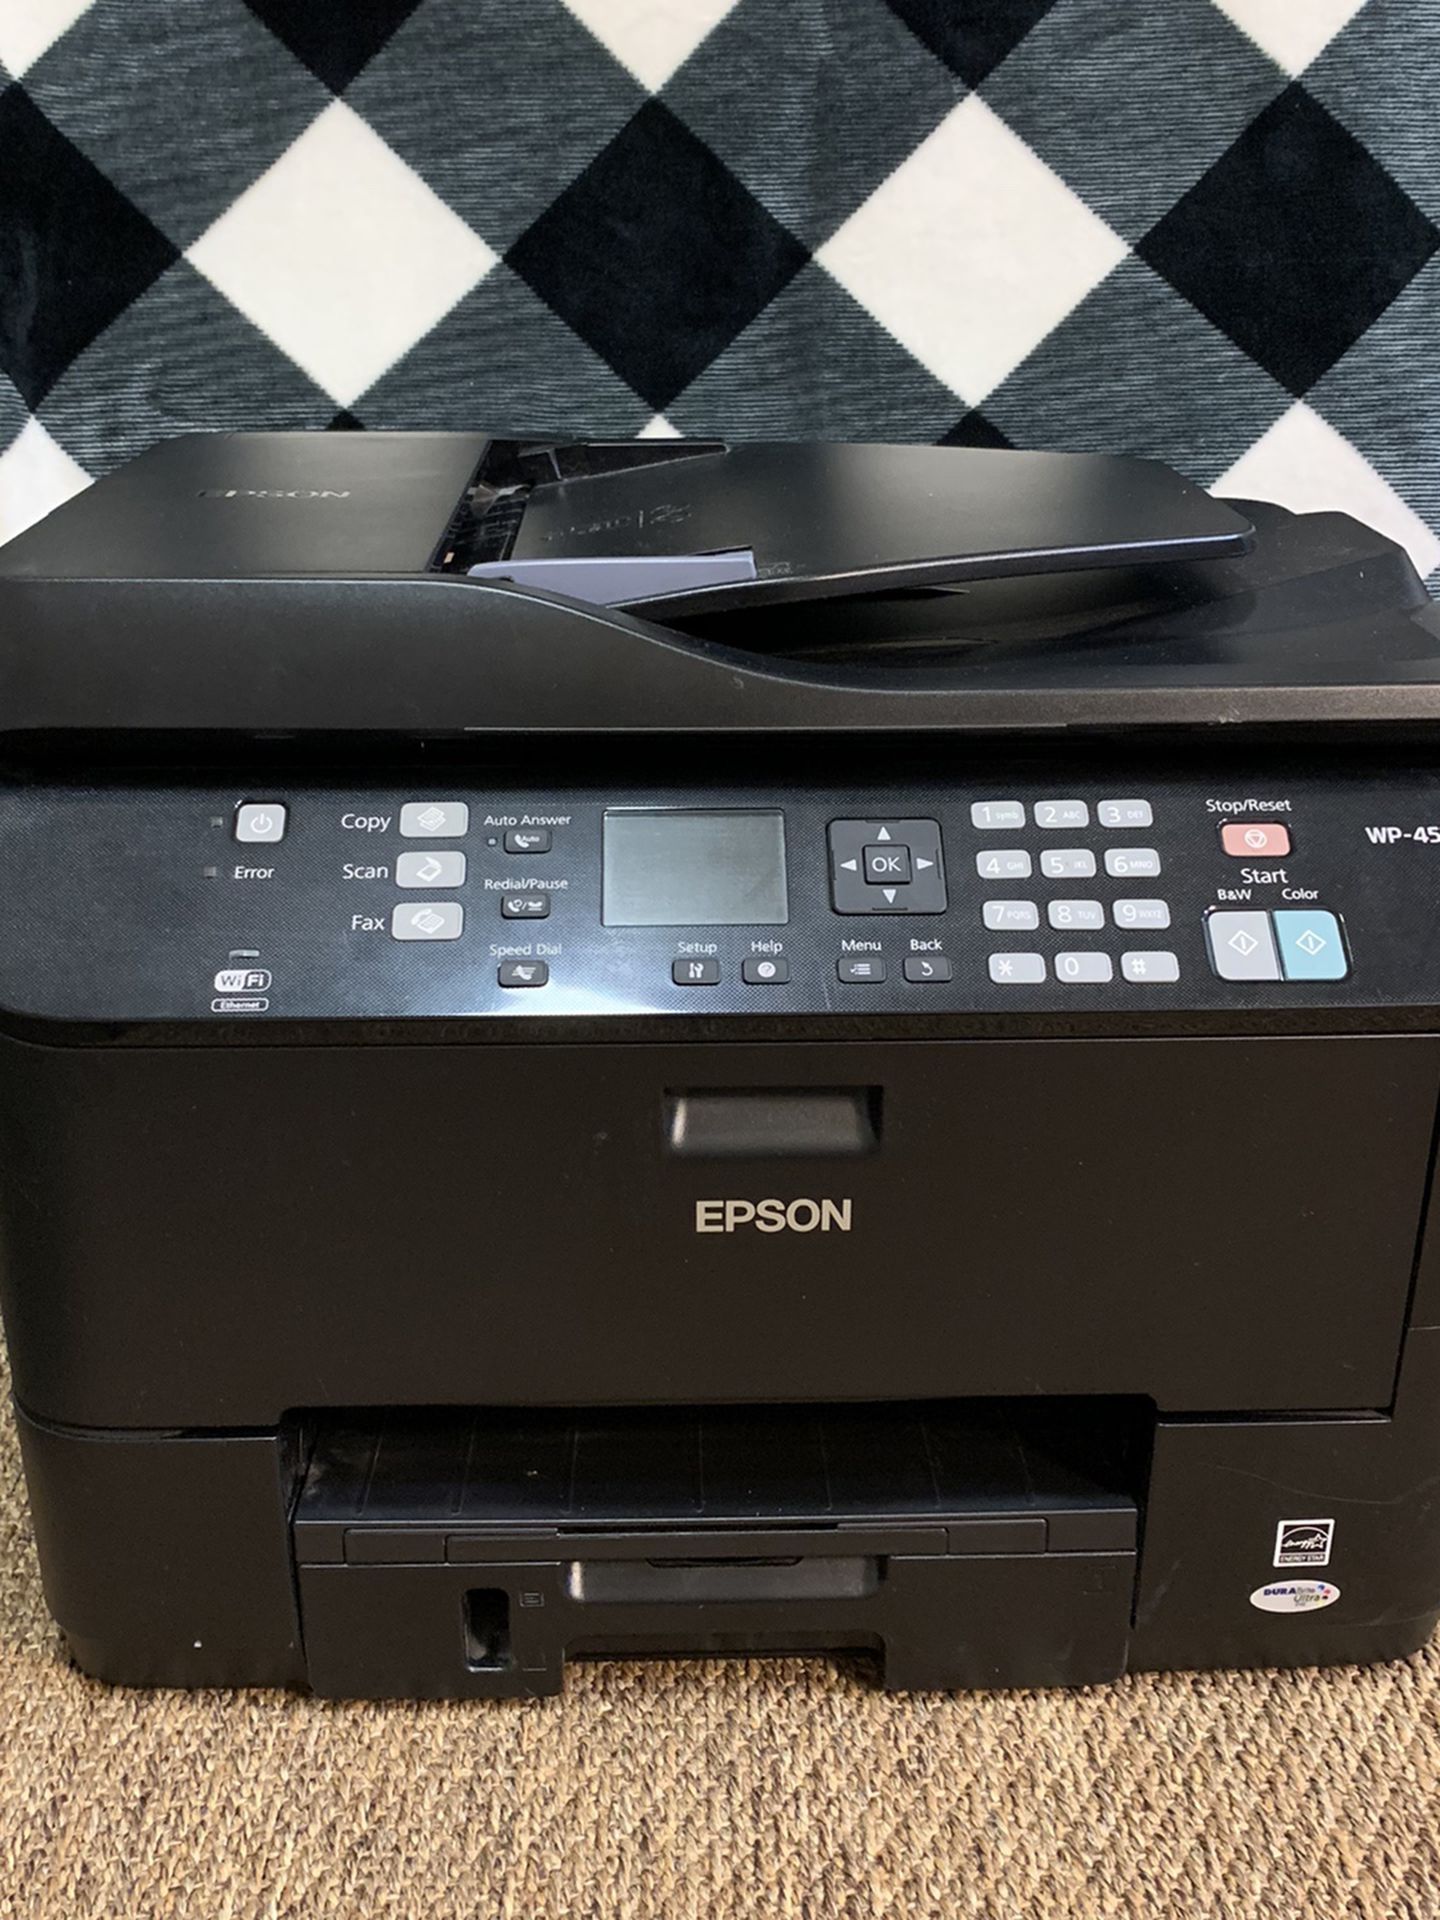 EPSON COPY/SCANER/FAX (with Wi-Fi)